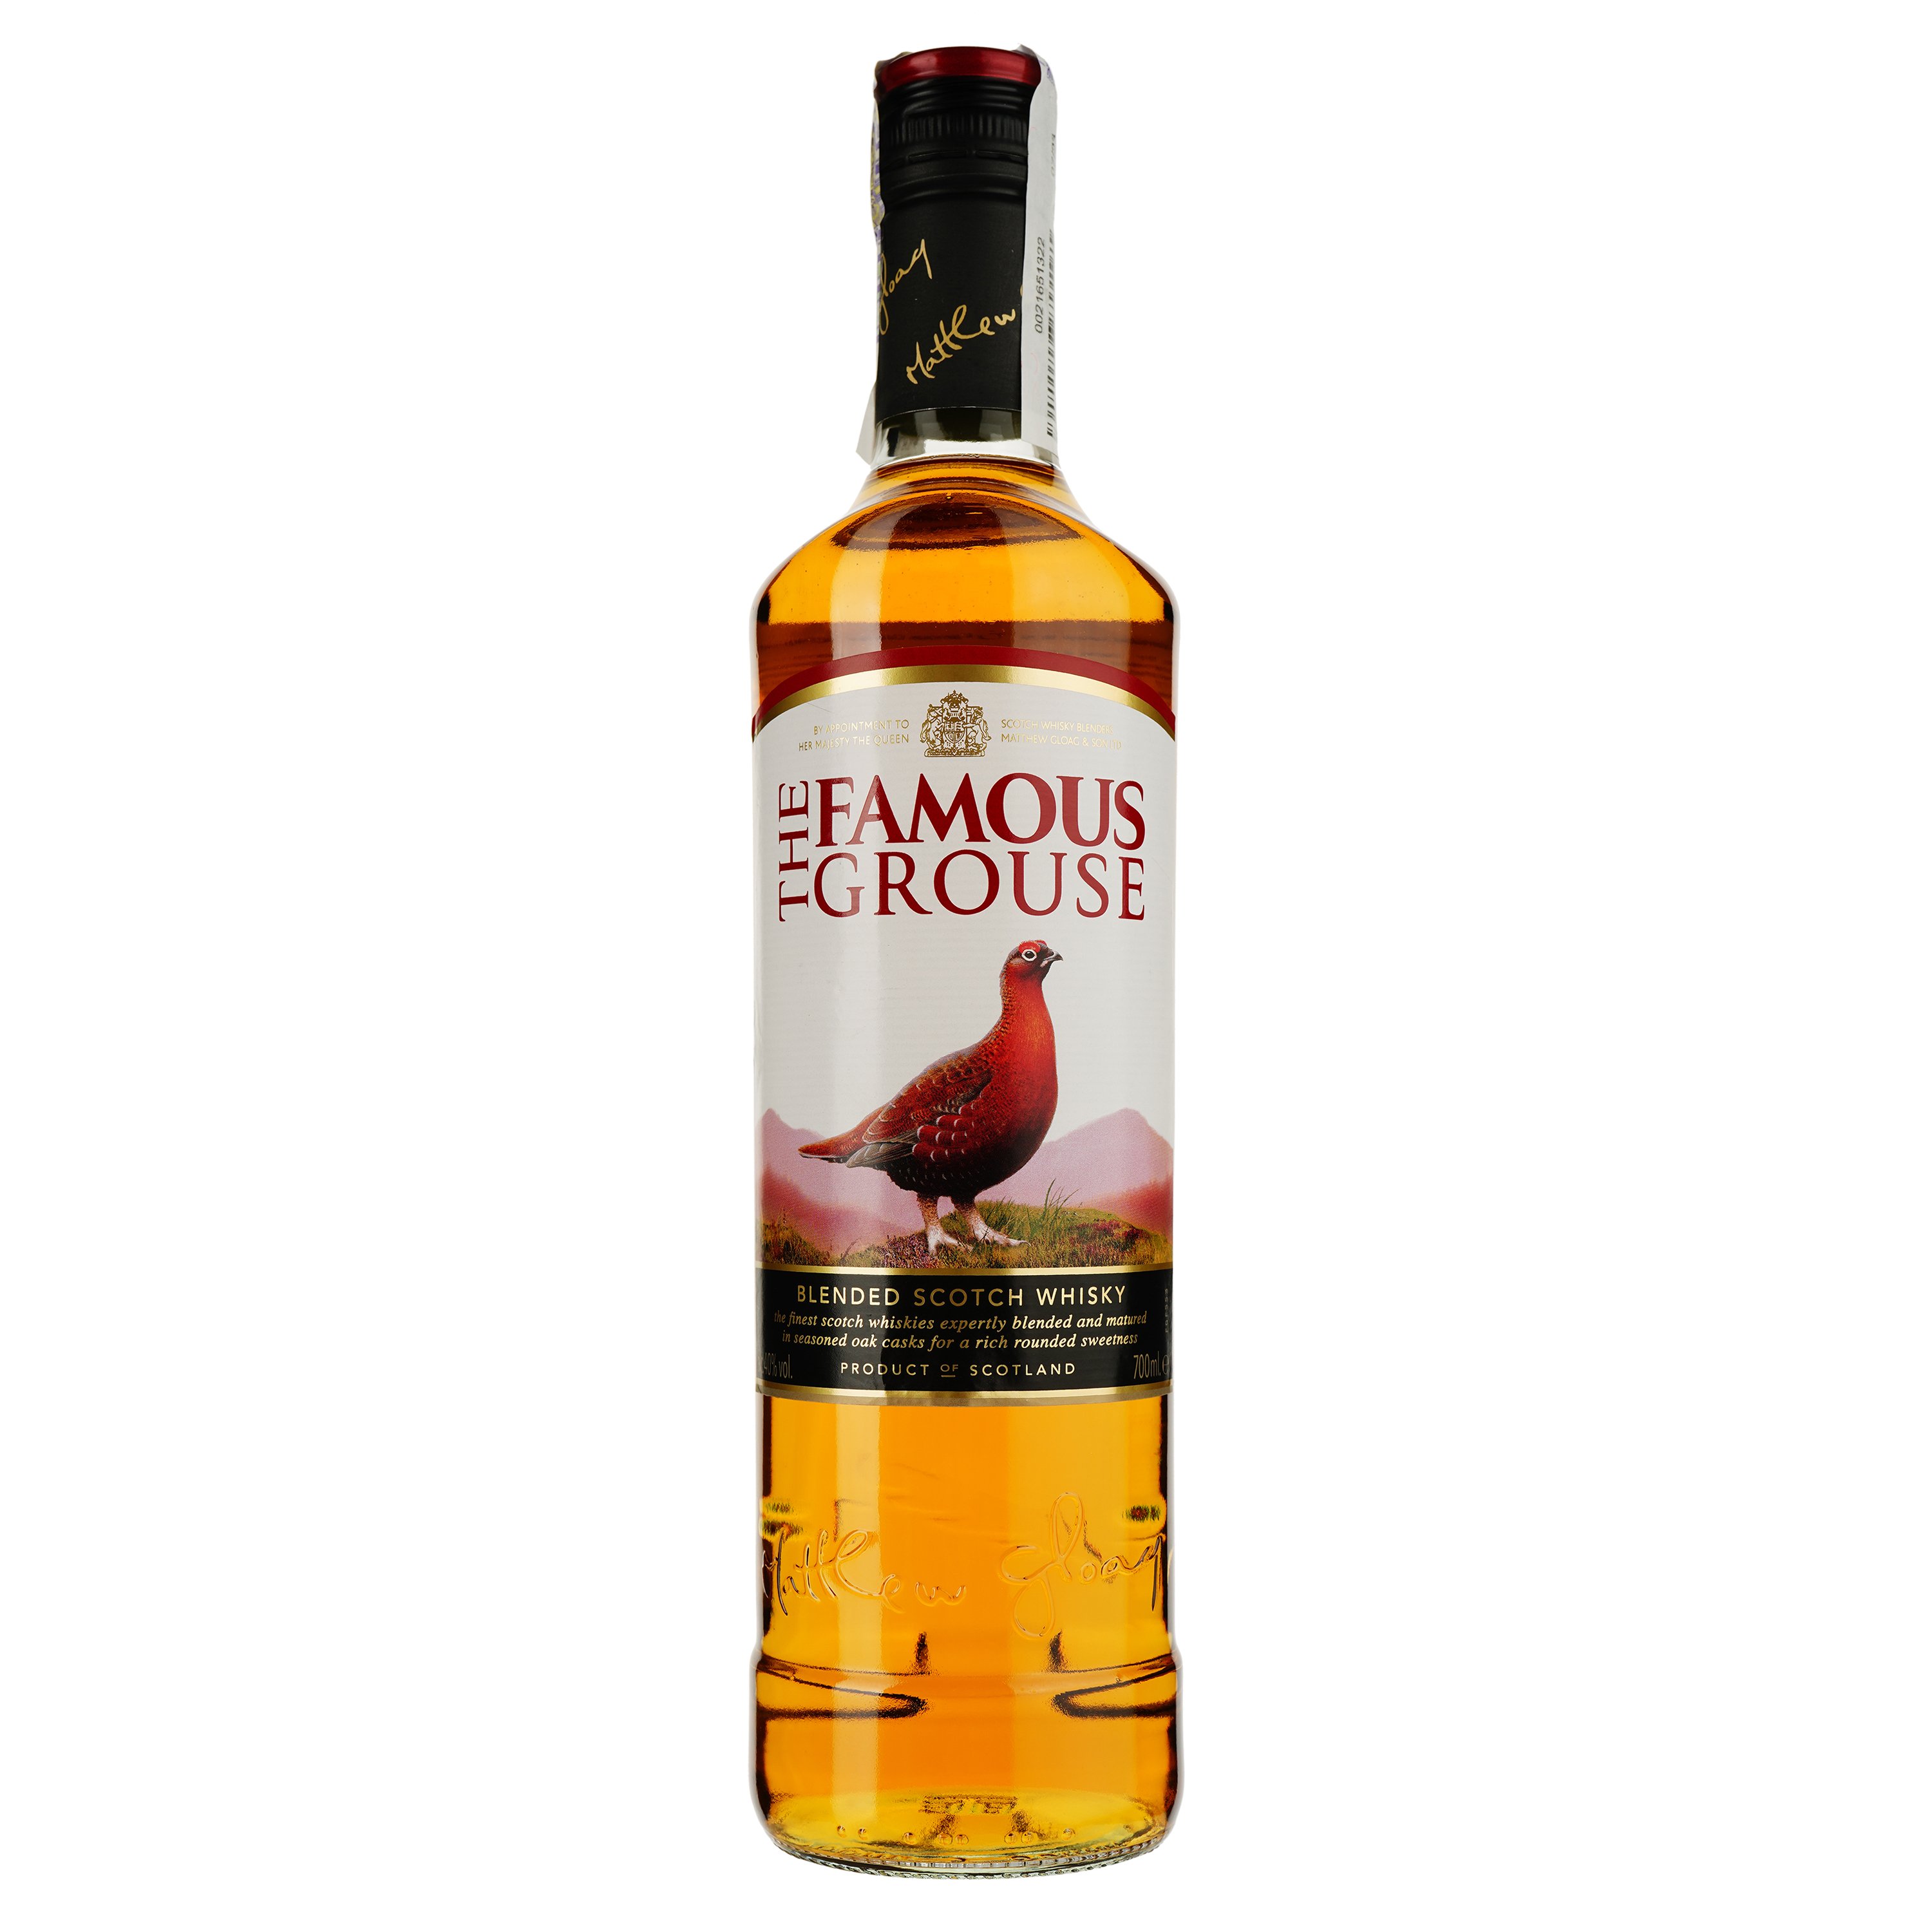 Виски Famous Grouse Blended Scotch Whisky 40% 0.7 л (89537) - фото 1